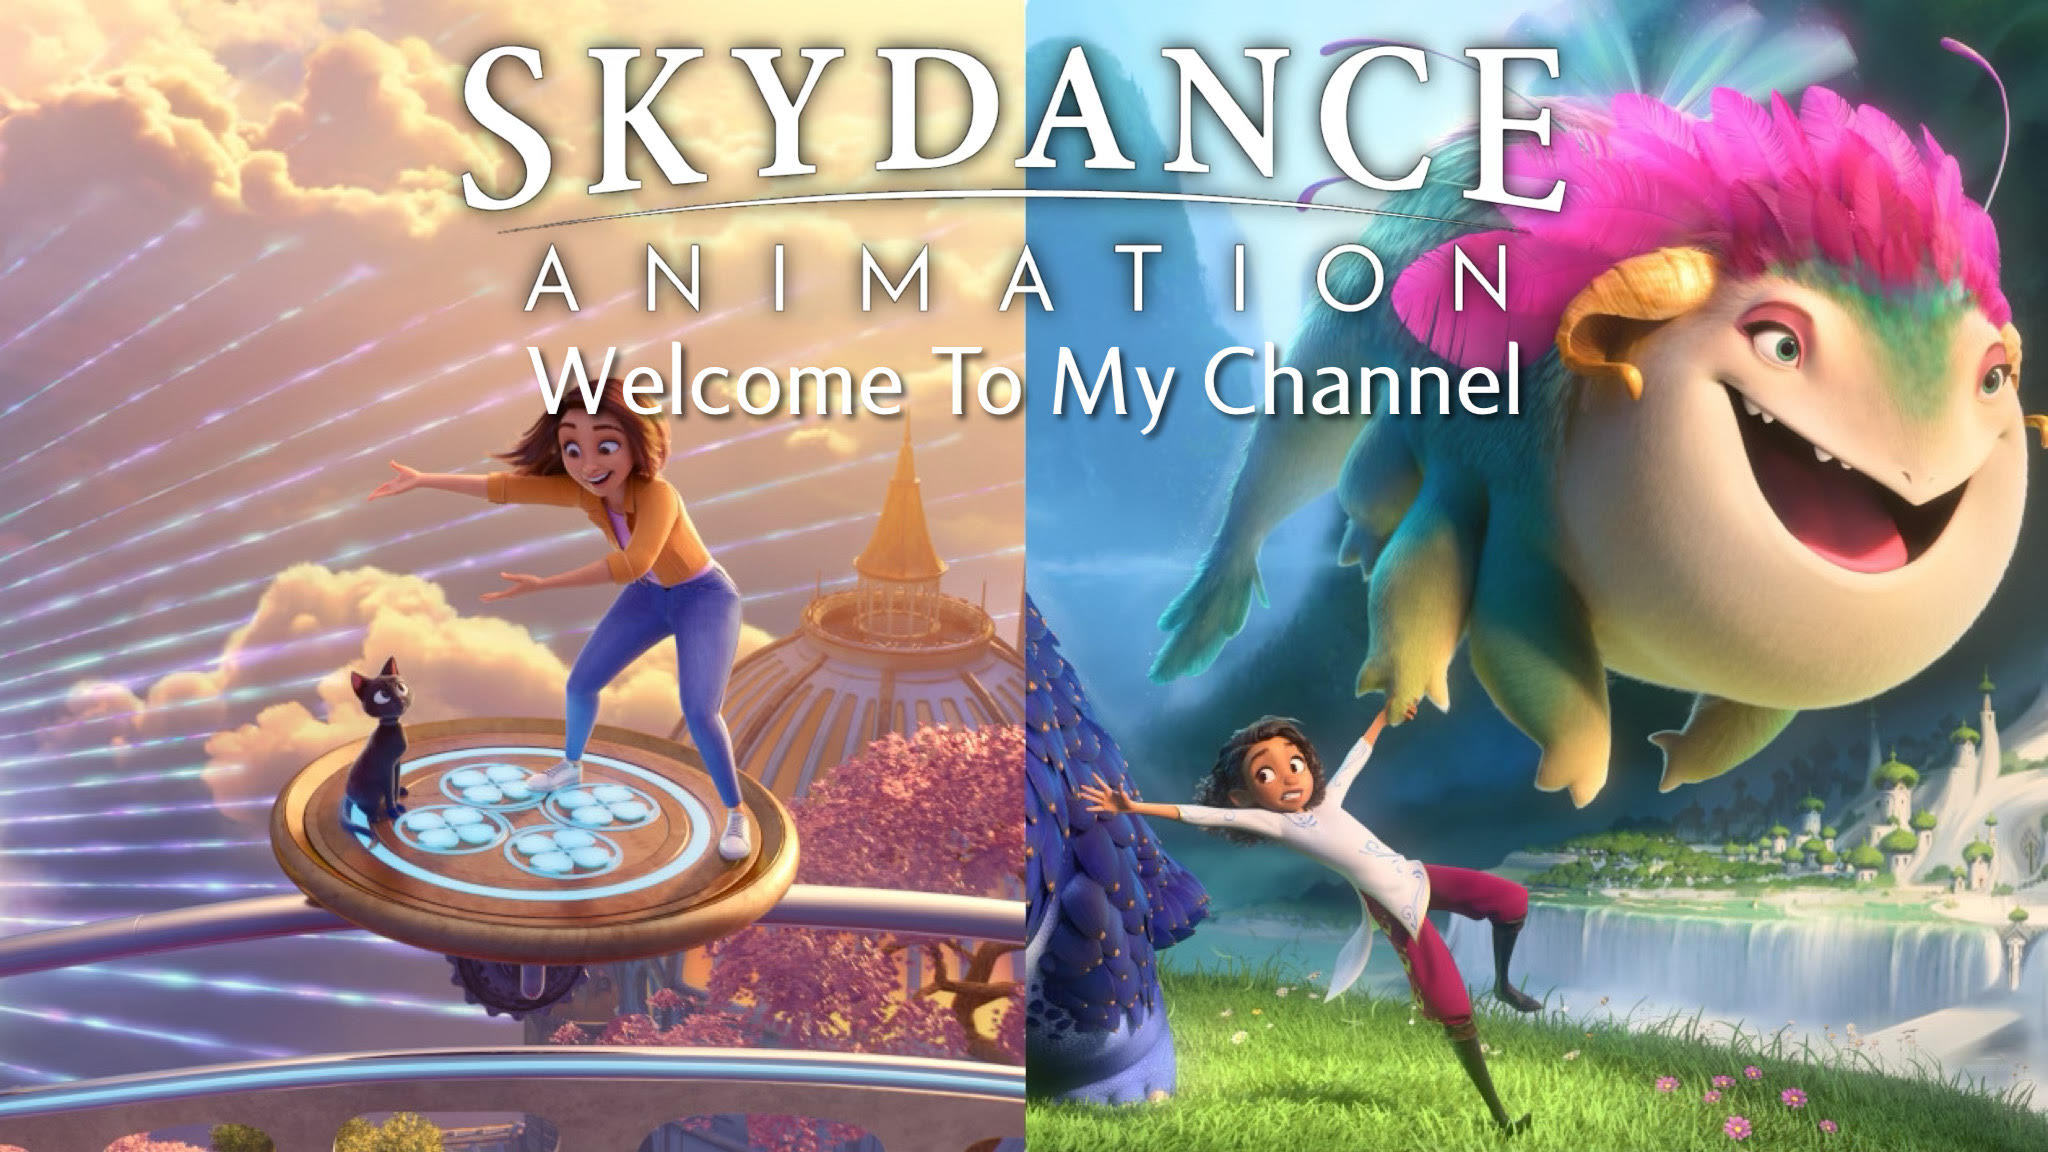 Welcome To My Channel (Skydance Animation Fans)